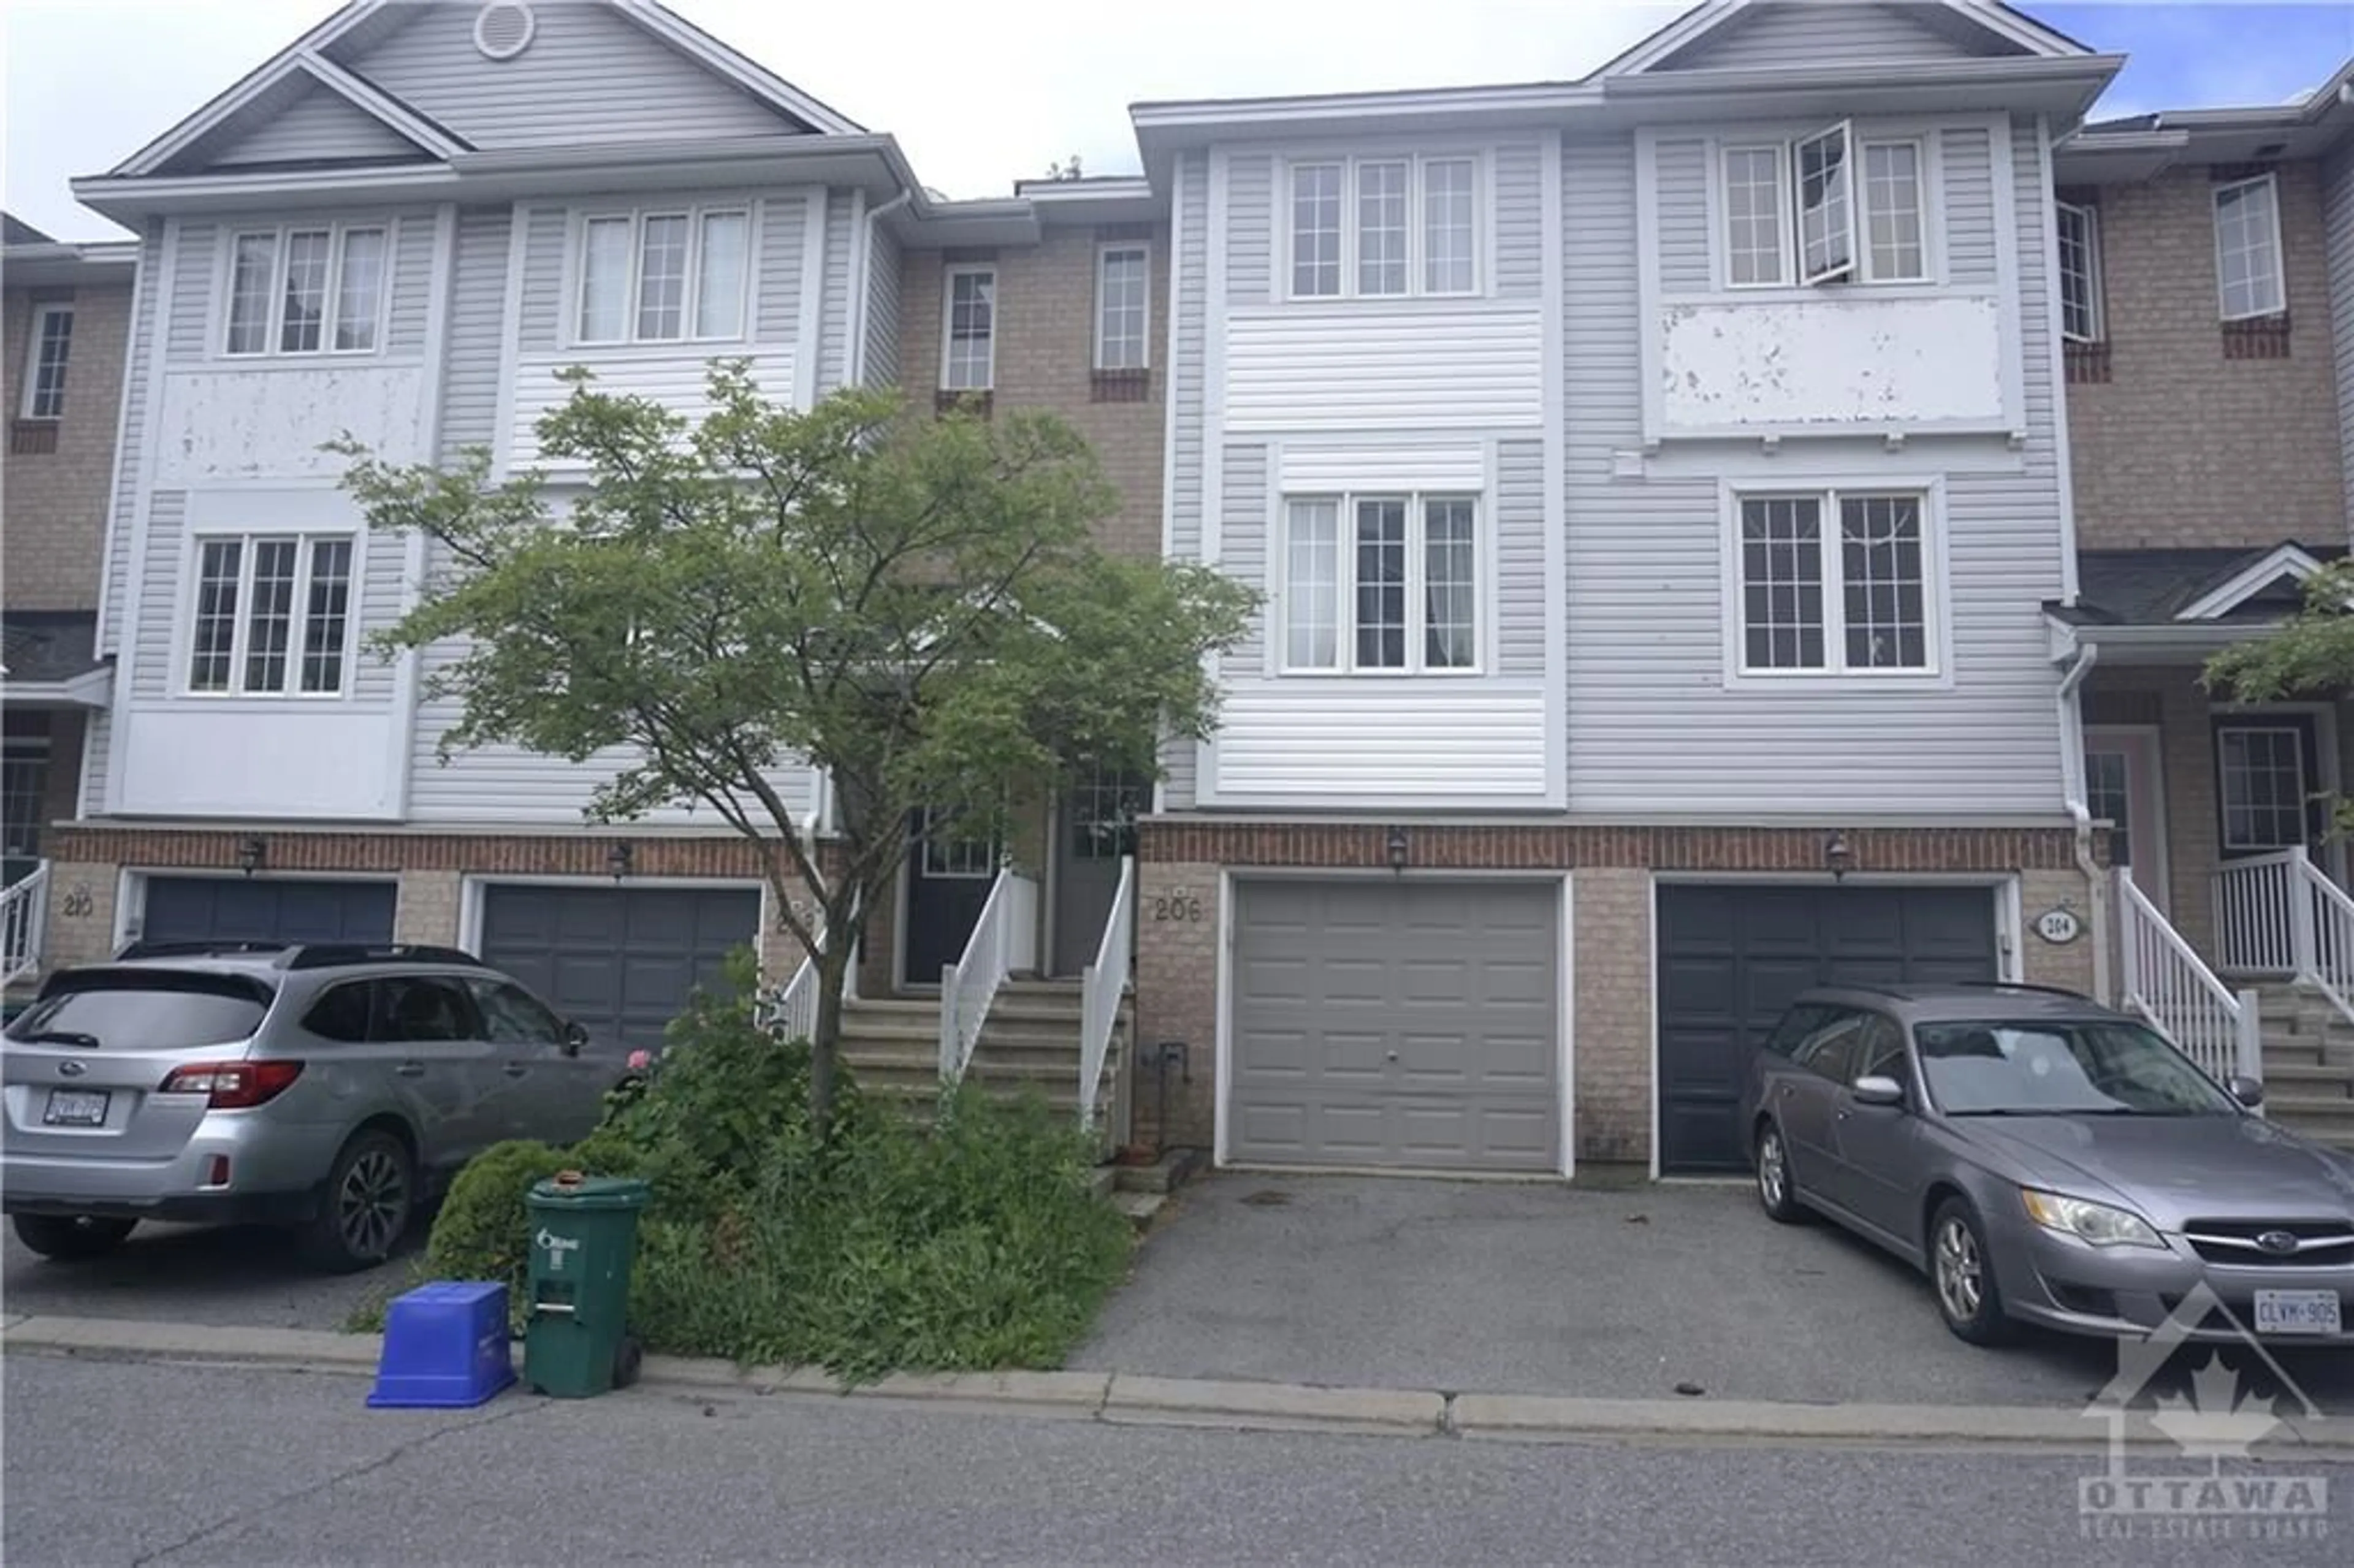 A pic from exterior of the house or condo for 206 RUTGERS Pvt, Ottawa Ontario K2C 4G7